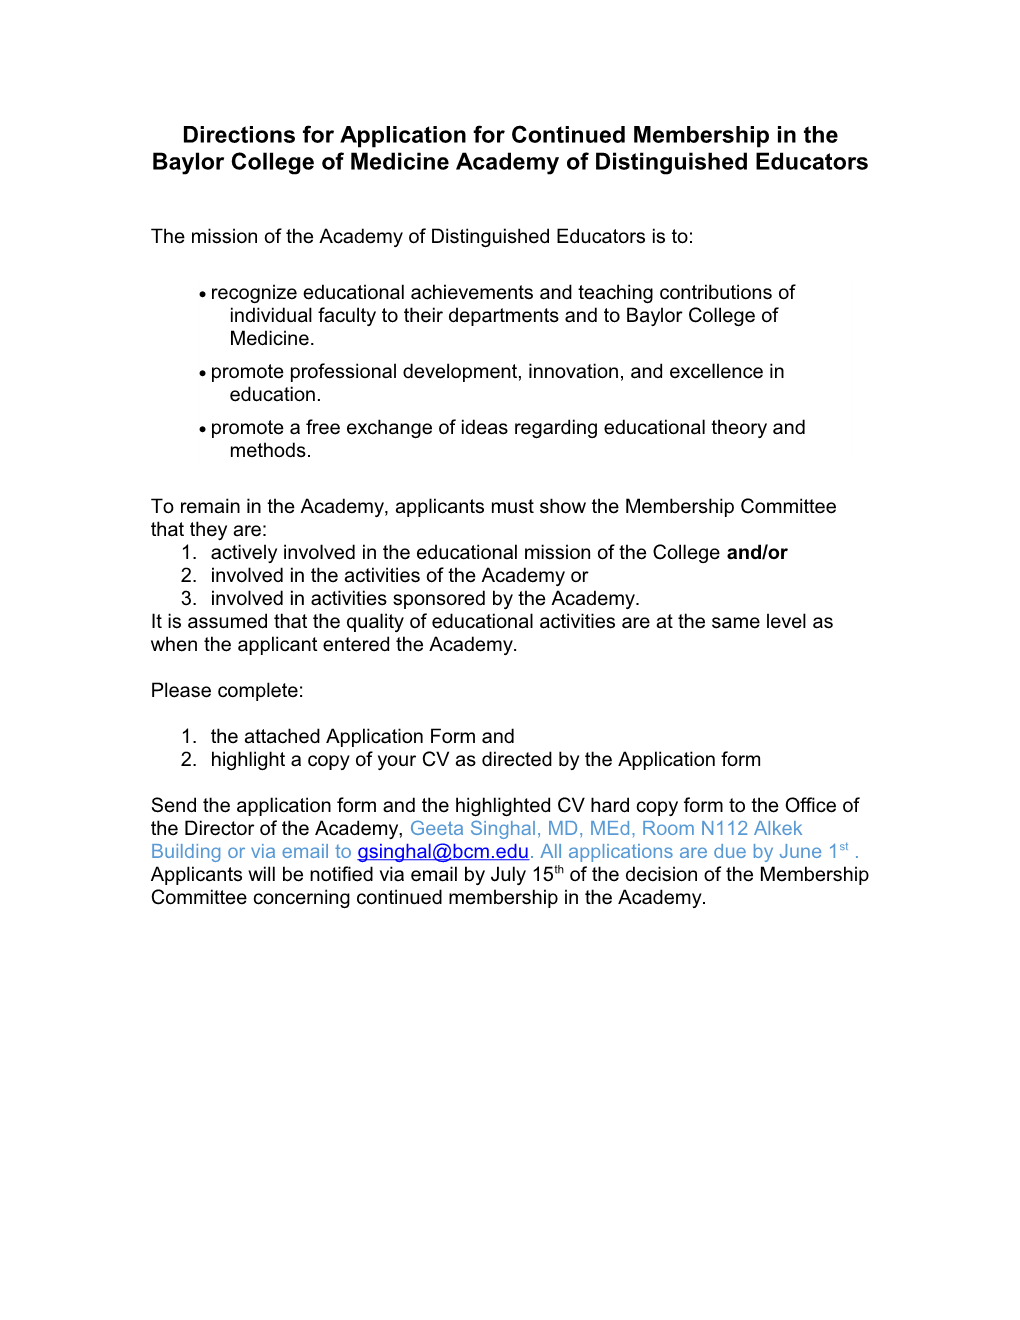 Directions for Application for Continued Membership in the Baylor College of Medicine Academy